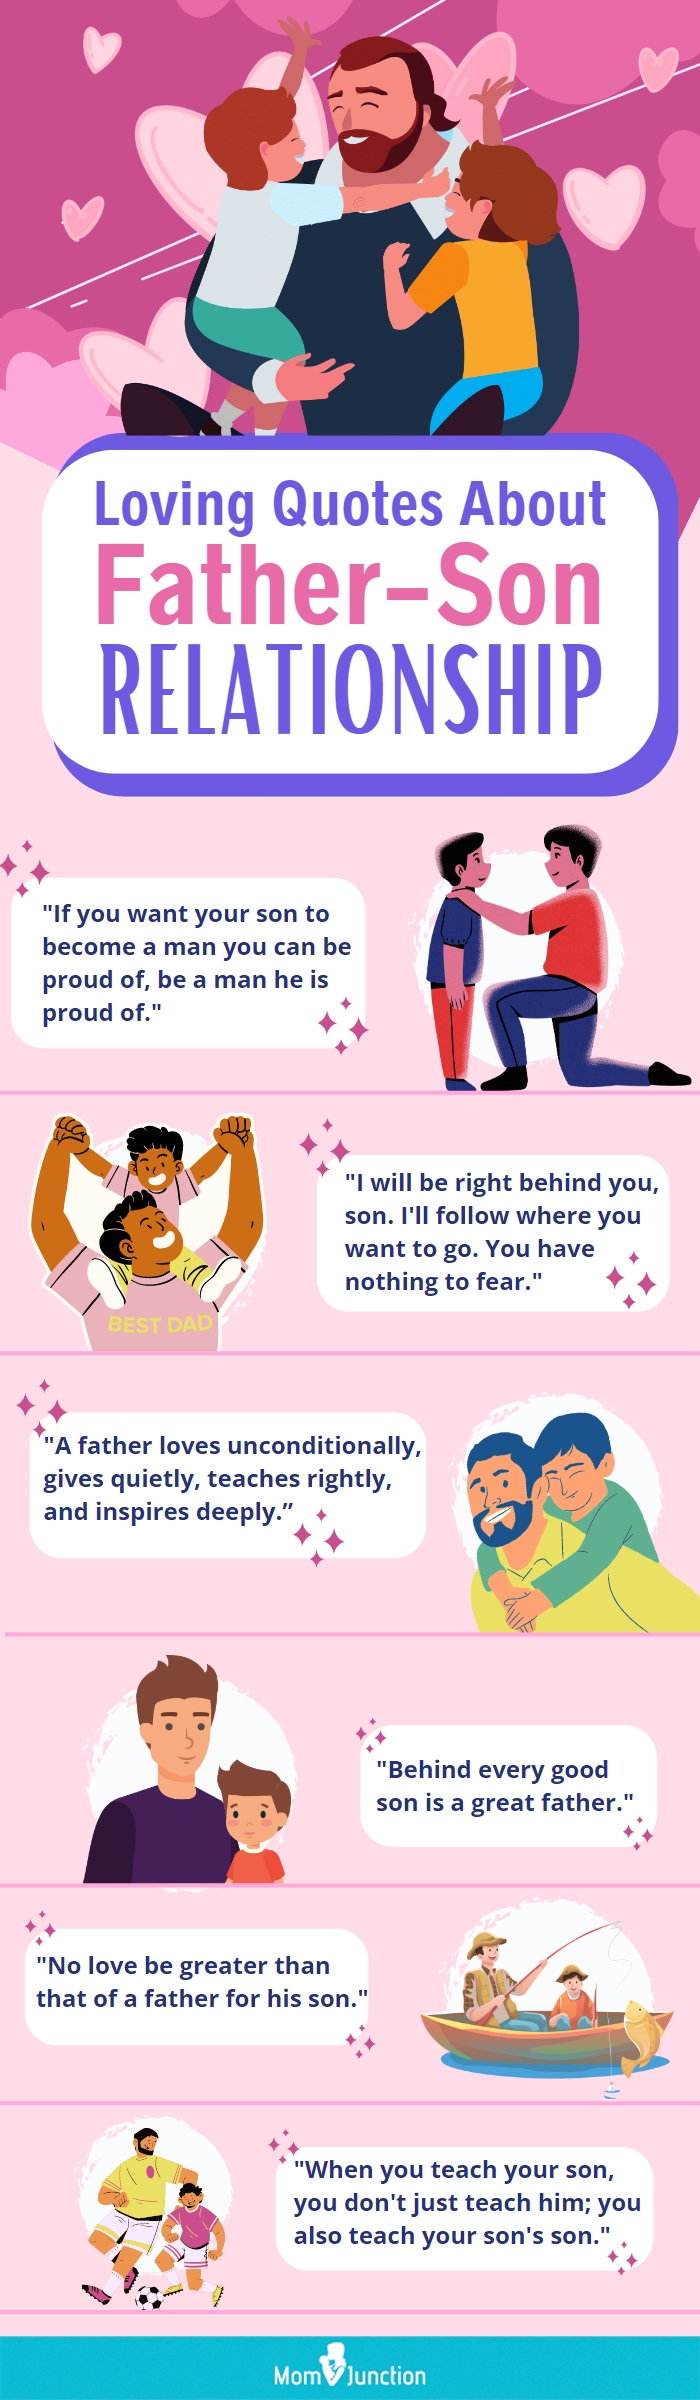 quotes about father son relationship (infographic)